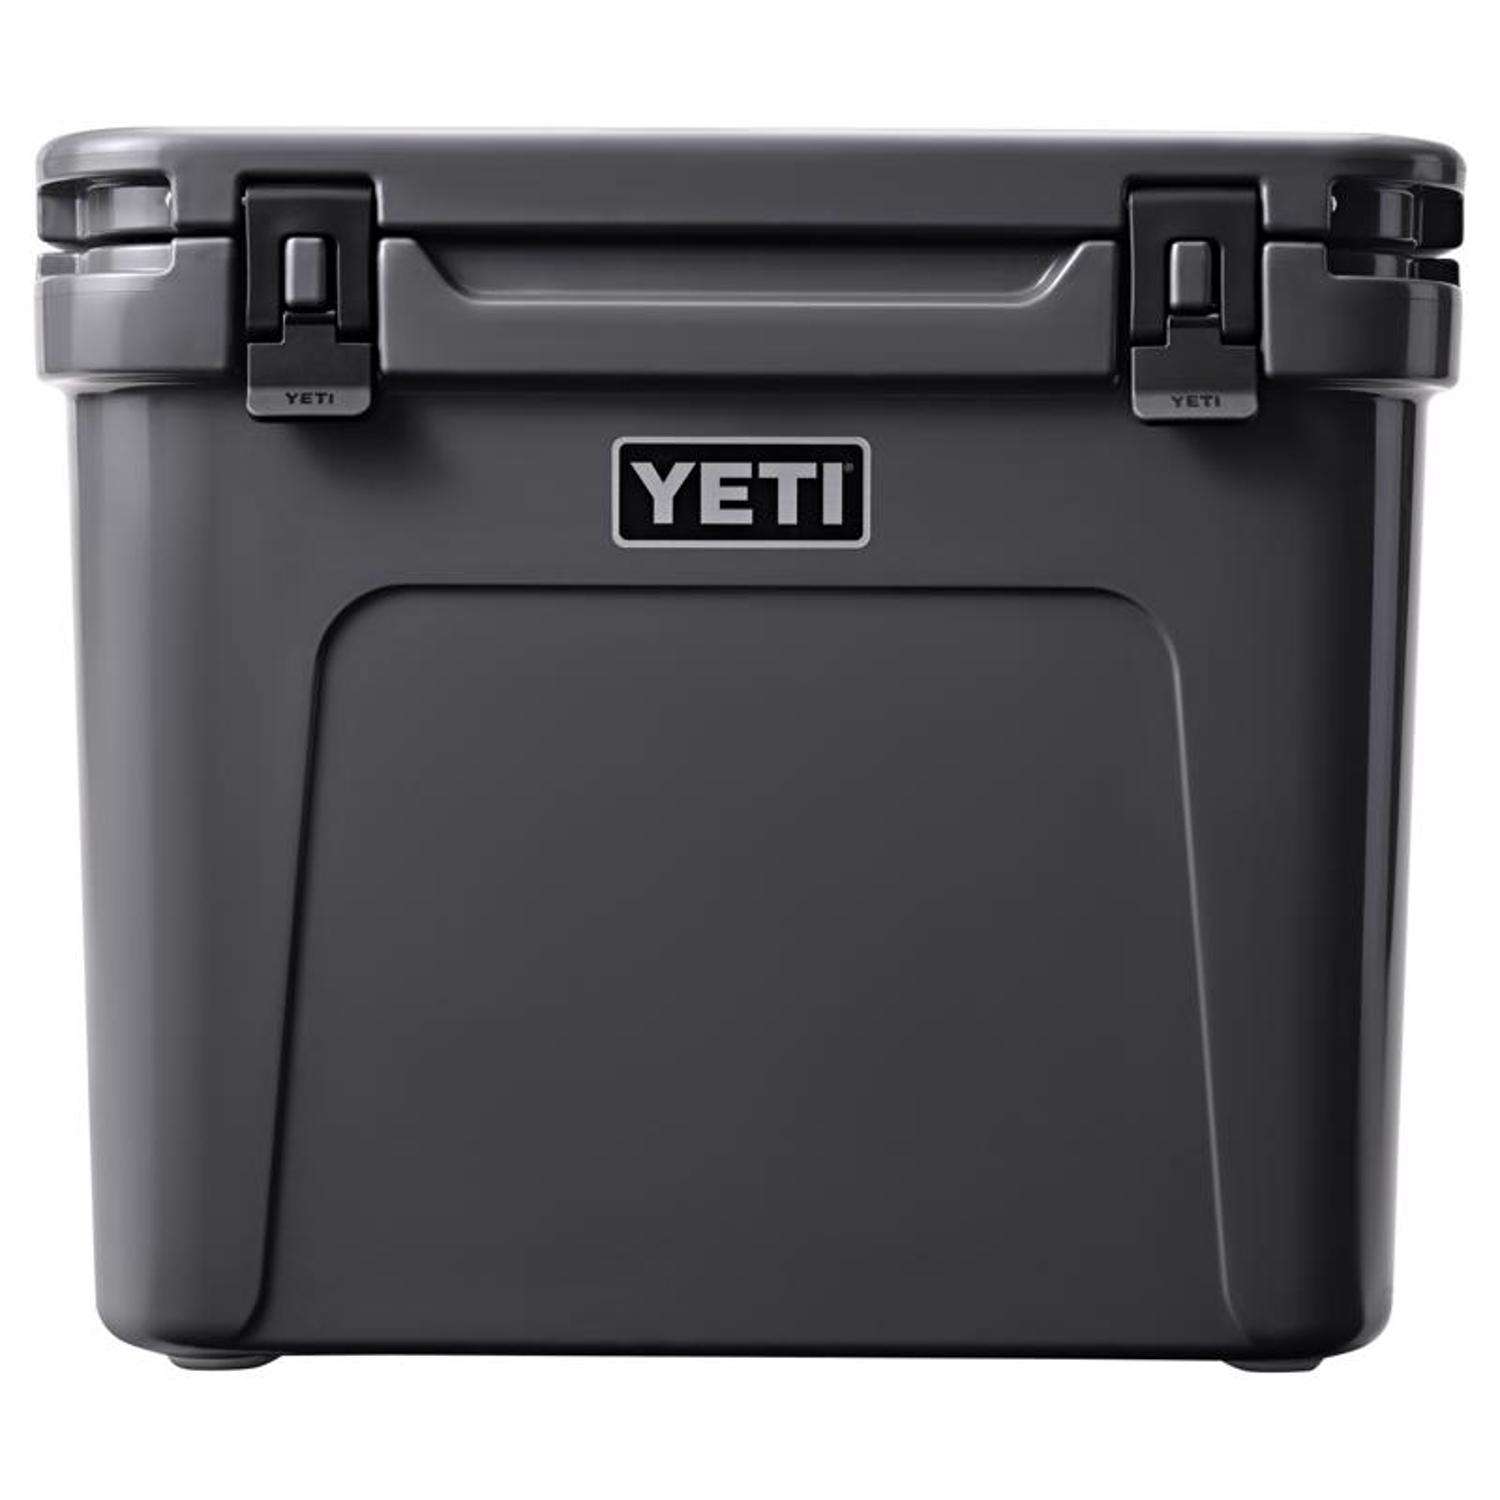 Cooler Basket for Yeti Tundra Haul, Yeti Roadie 48, Yeti Roadie 60, Stays Chilled and Dry, Compatible with Other Cooler Accessories Cooler Locks